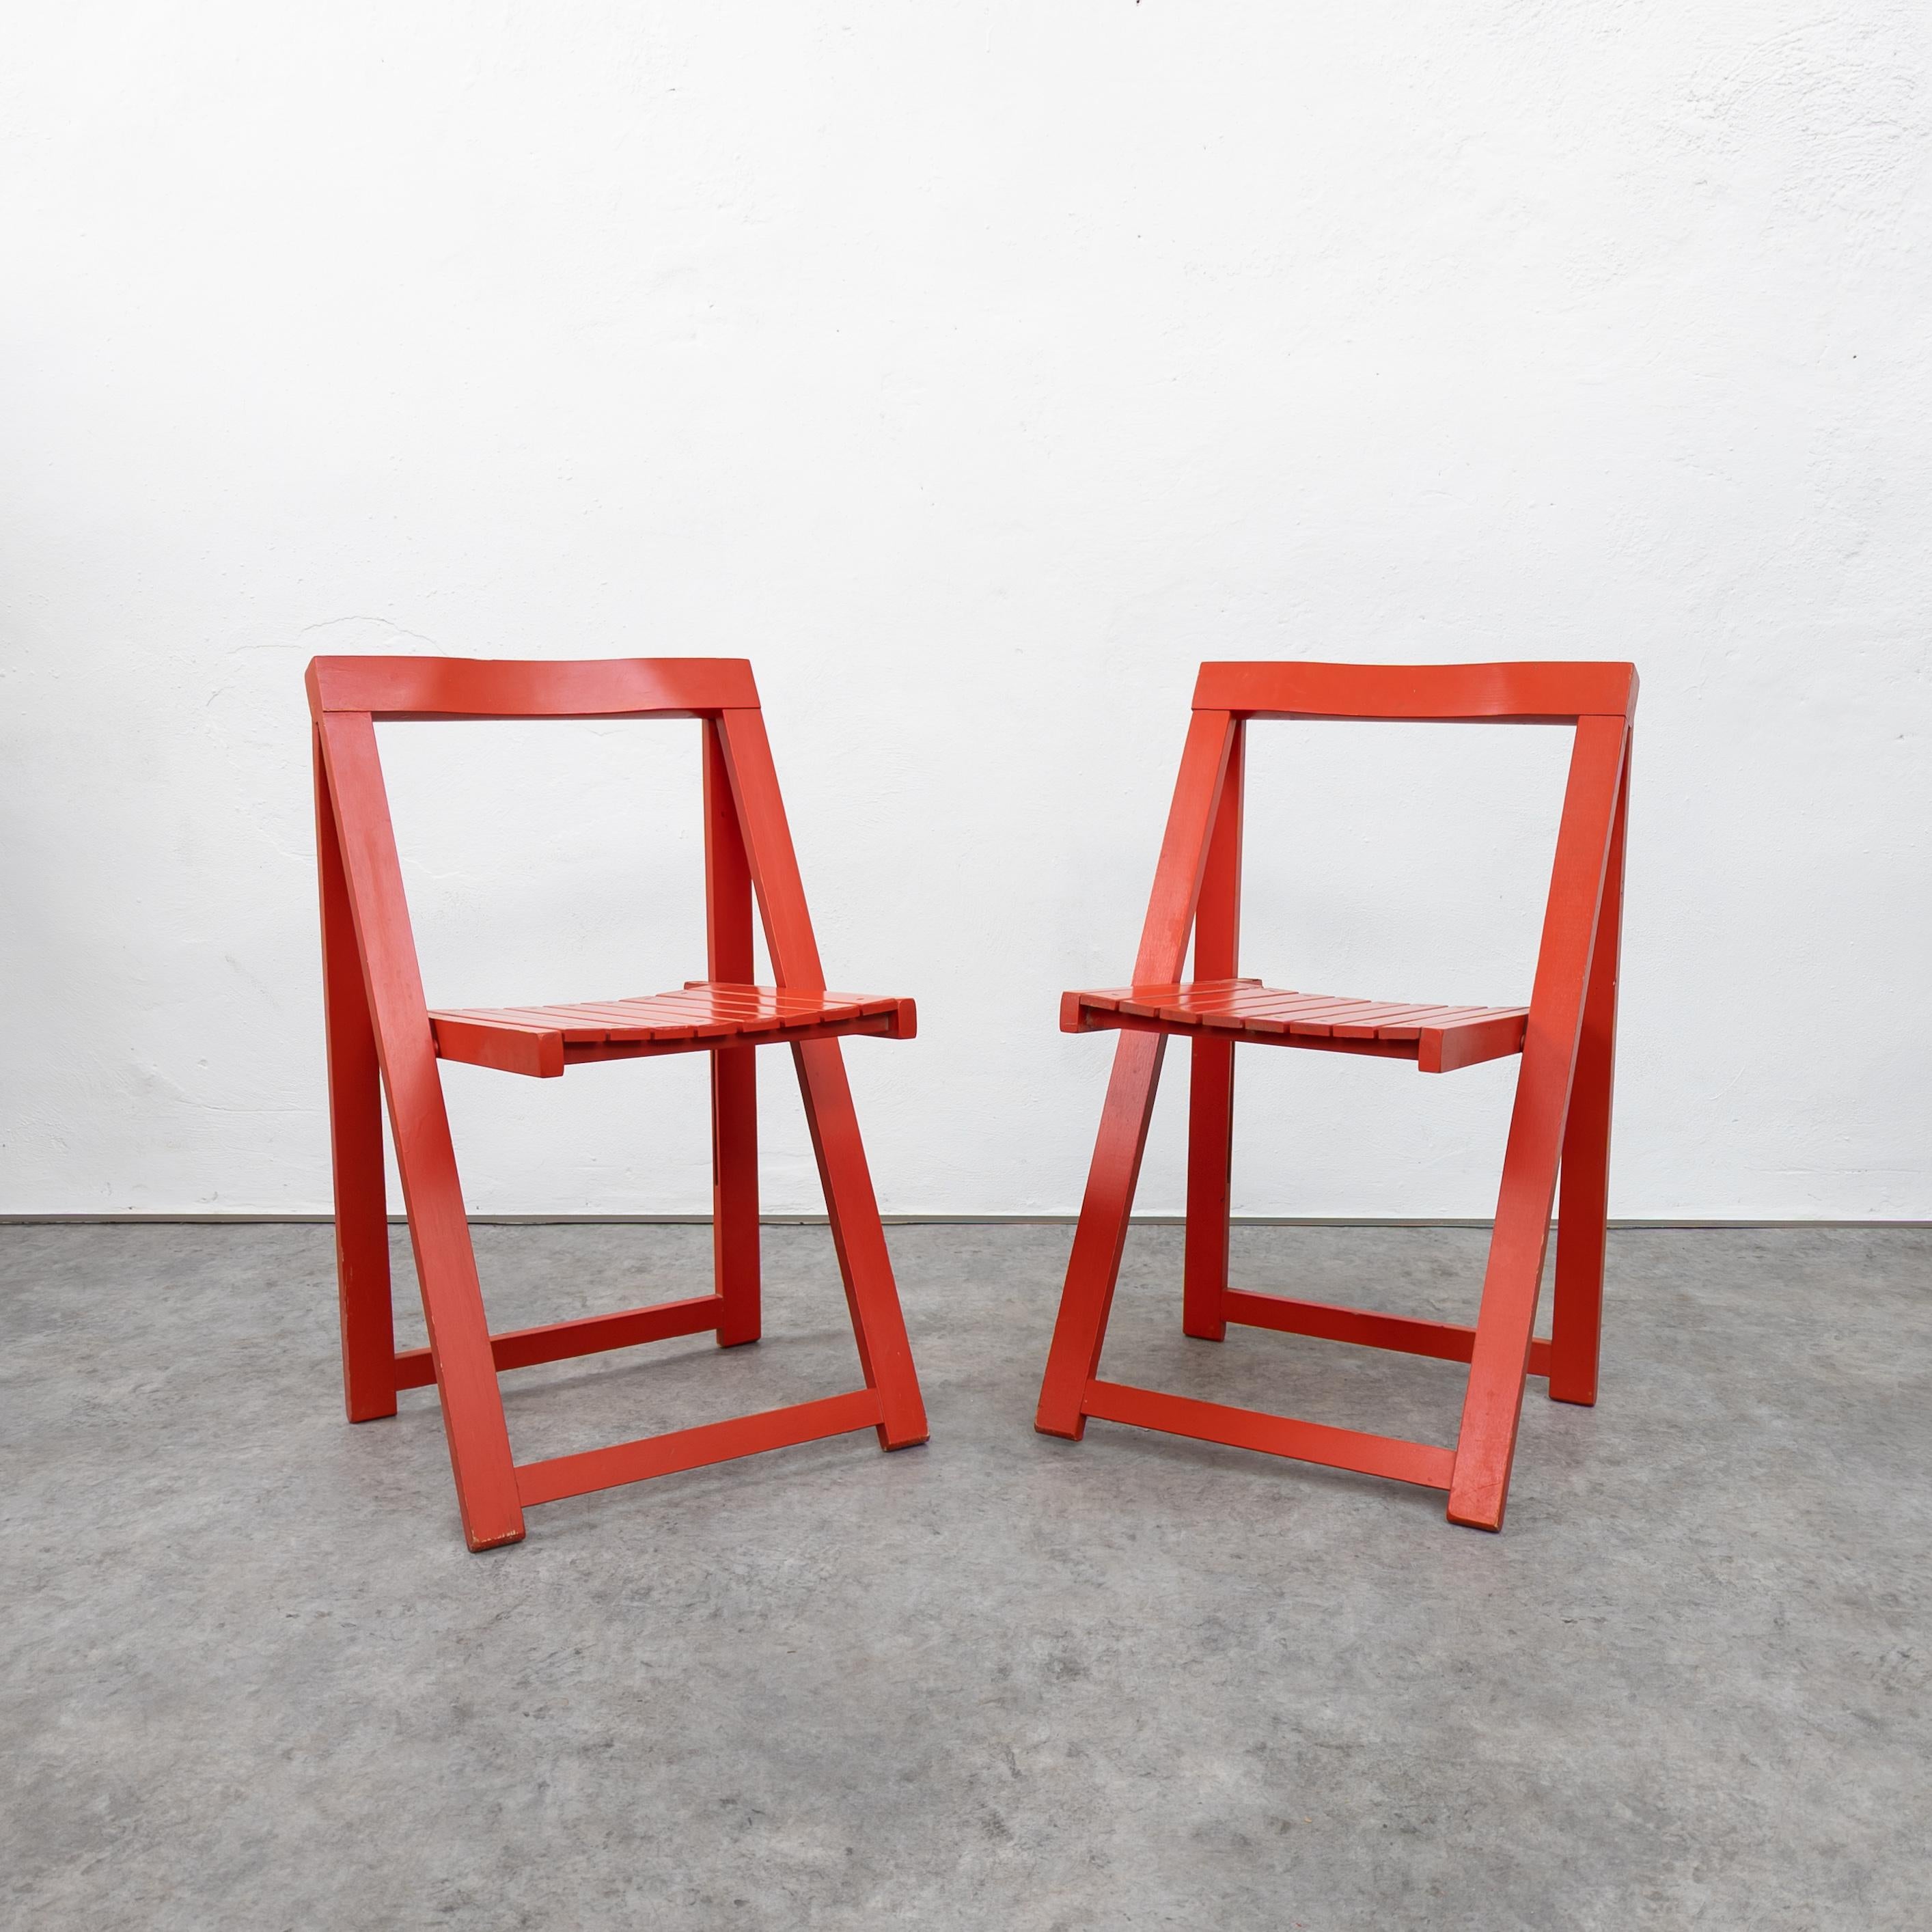 Pair of Vintage Folding Chairs by Aldo Jacober for Alberto Bazzani For Sale 1